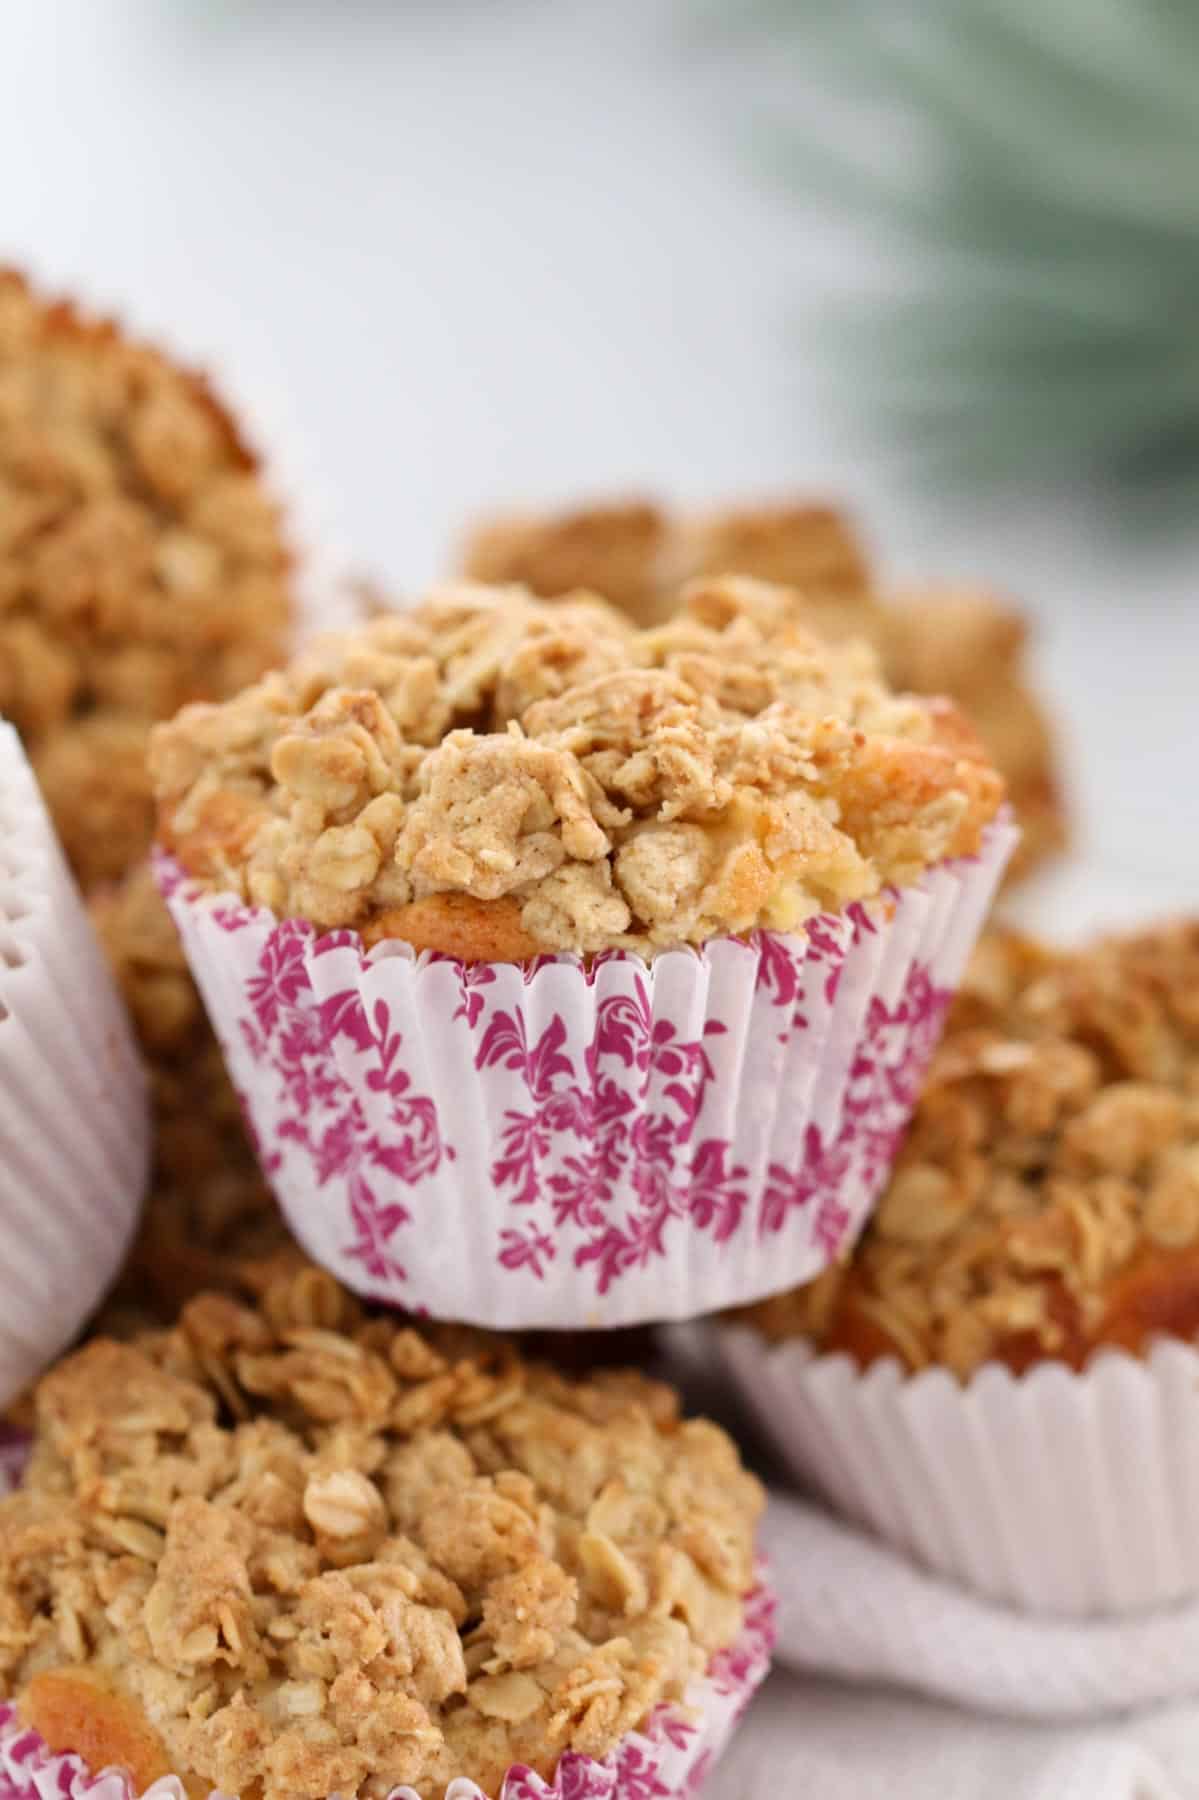 A close up of crunchy crumble on top of a muffin.